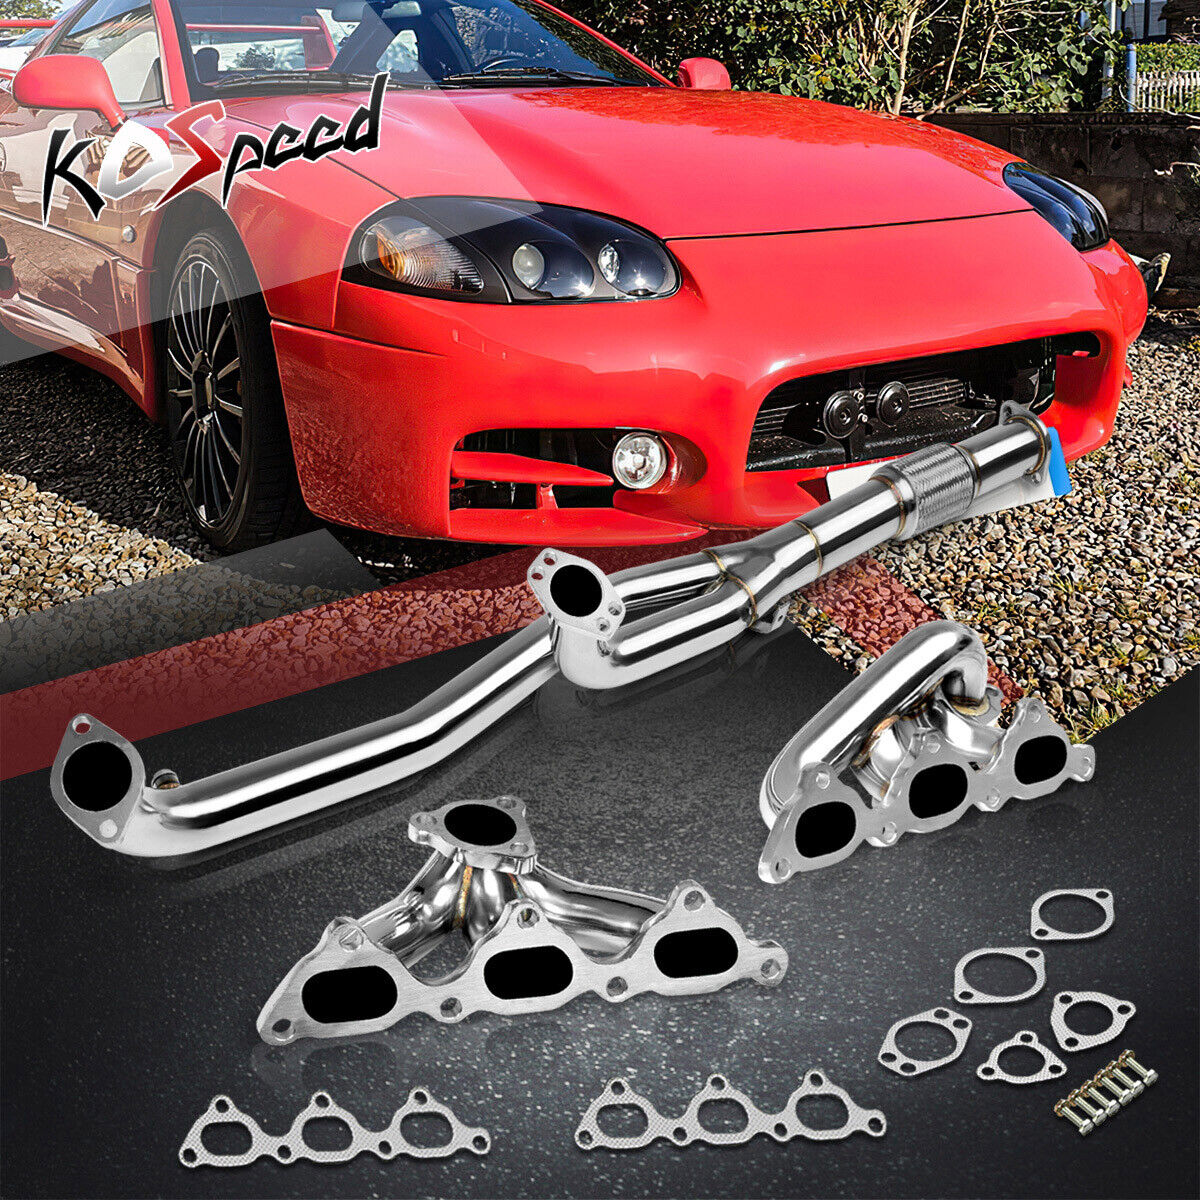 STAINLESS STEEL TURBO MANIFOLD/HEADER + DOWNPIPE FOR 1991-1999 3000GT/STEALTH